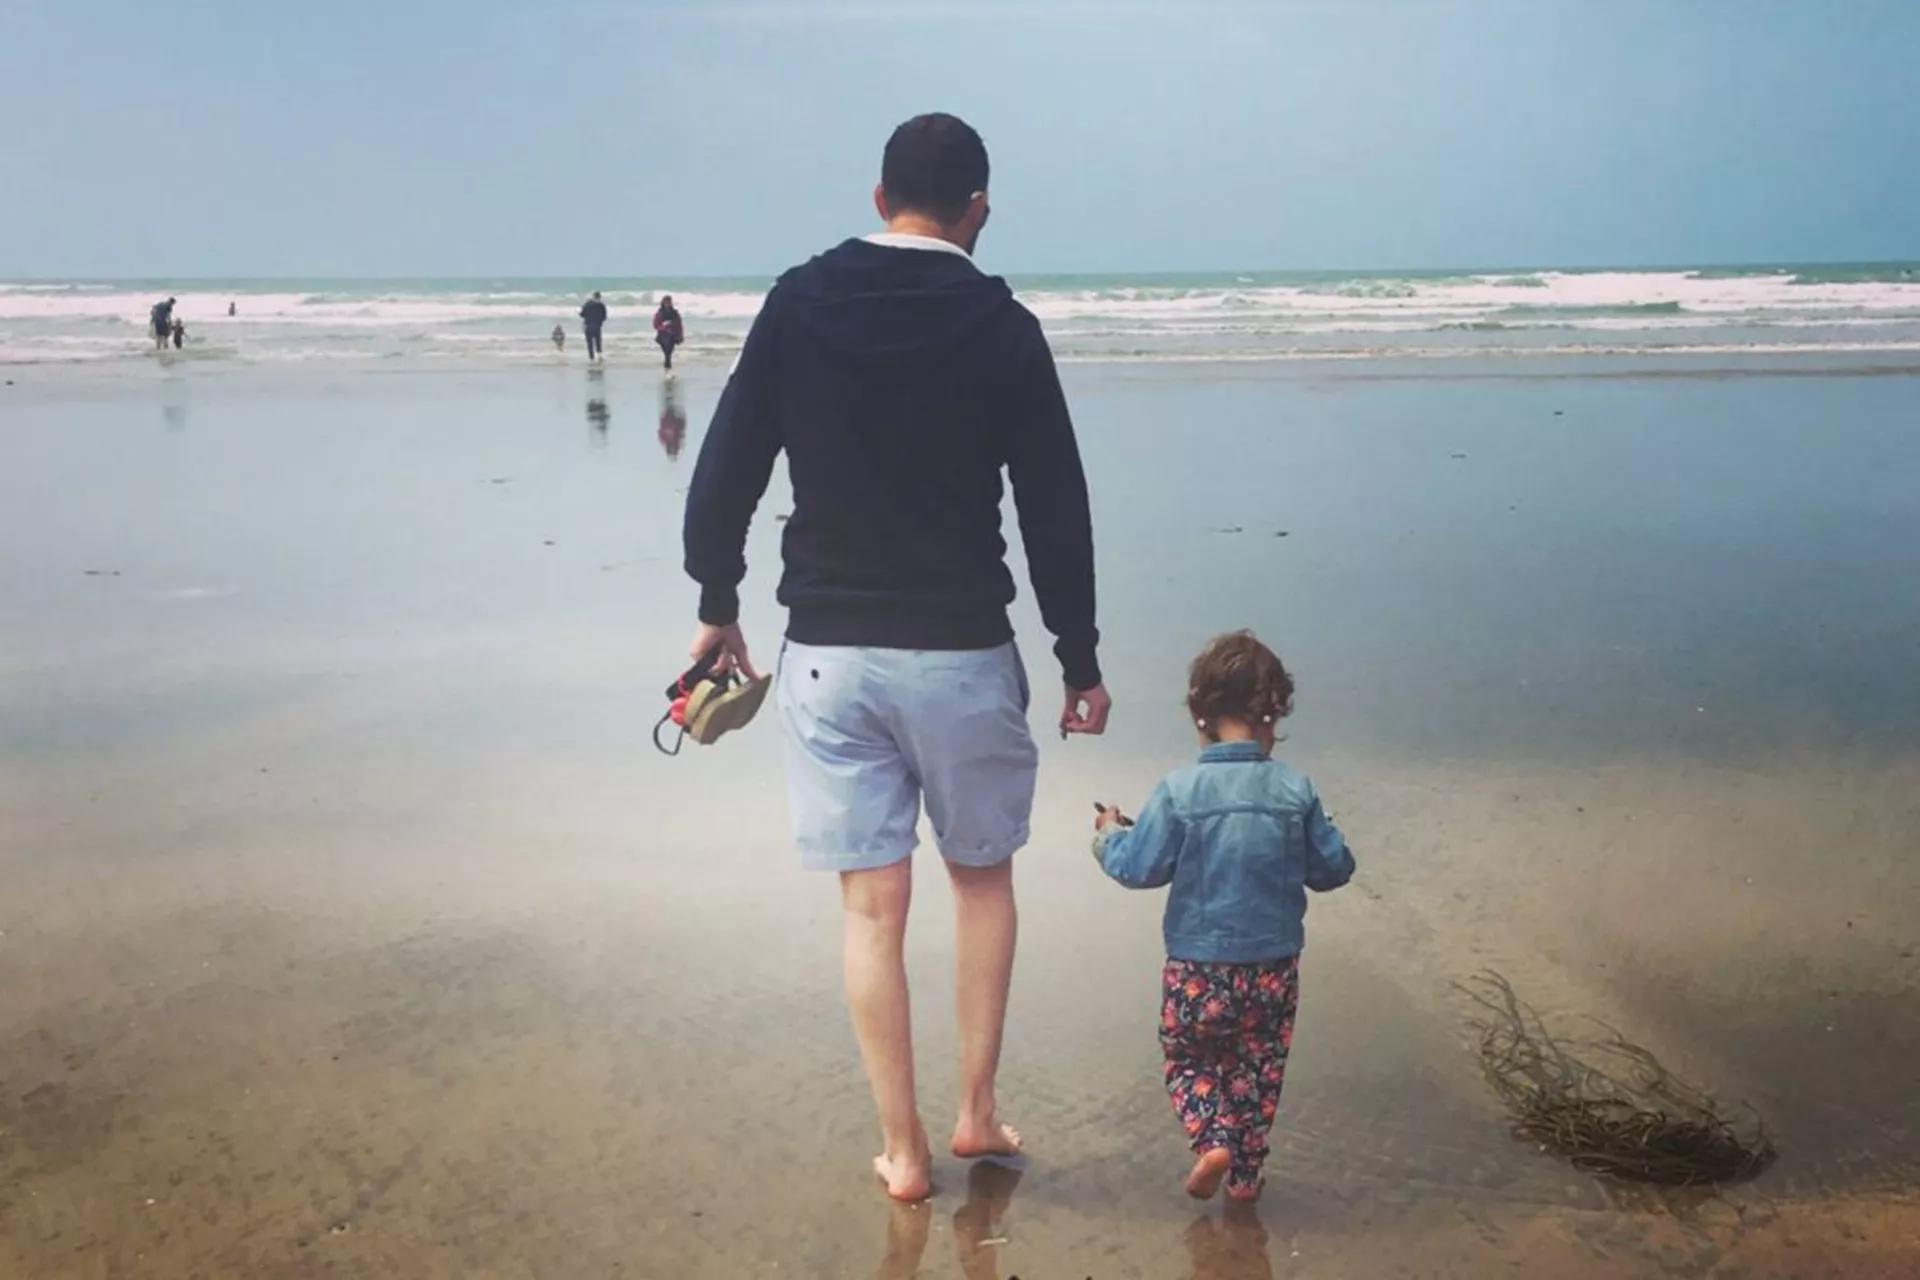 Alex, walking on the beach with his daughter